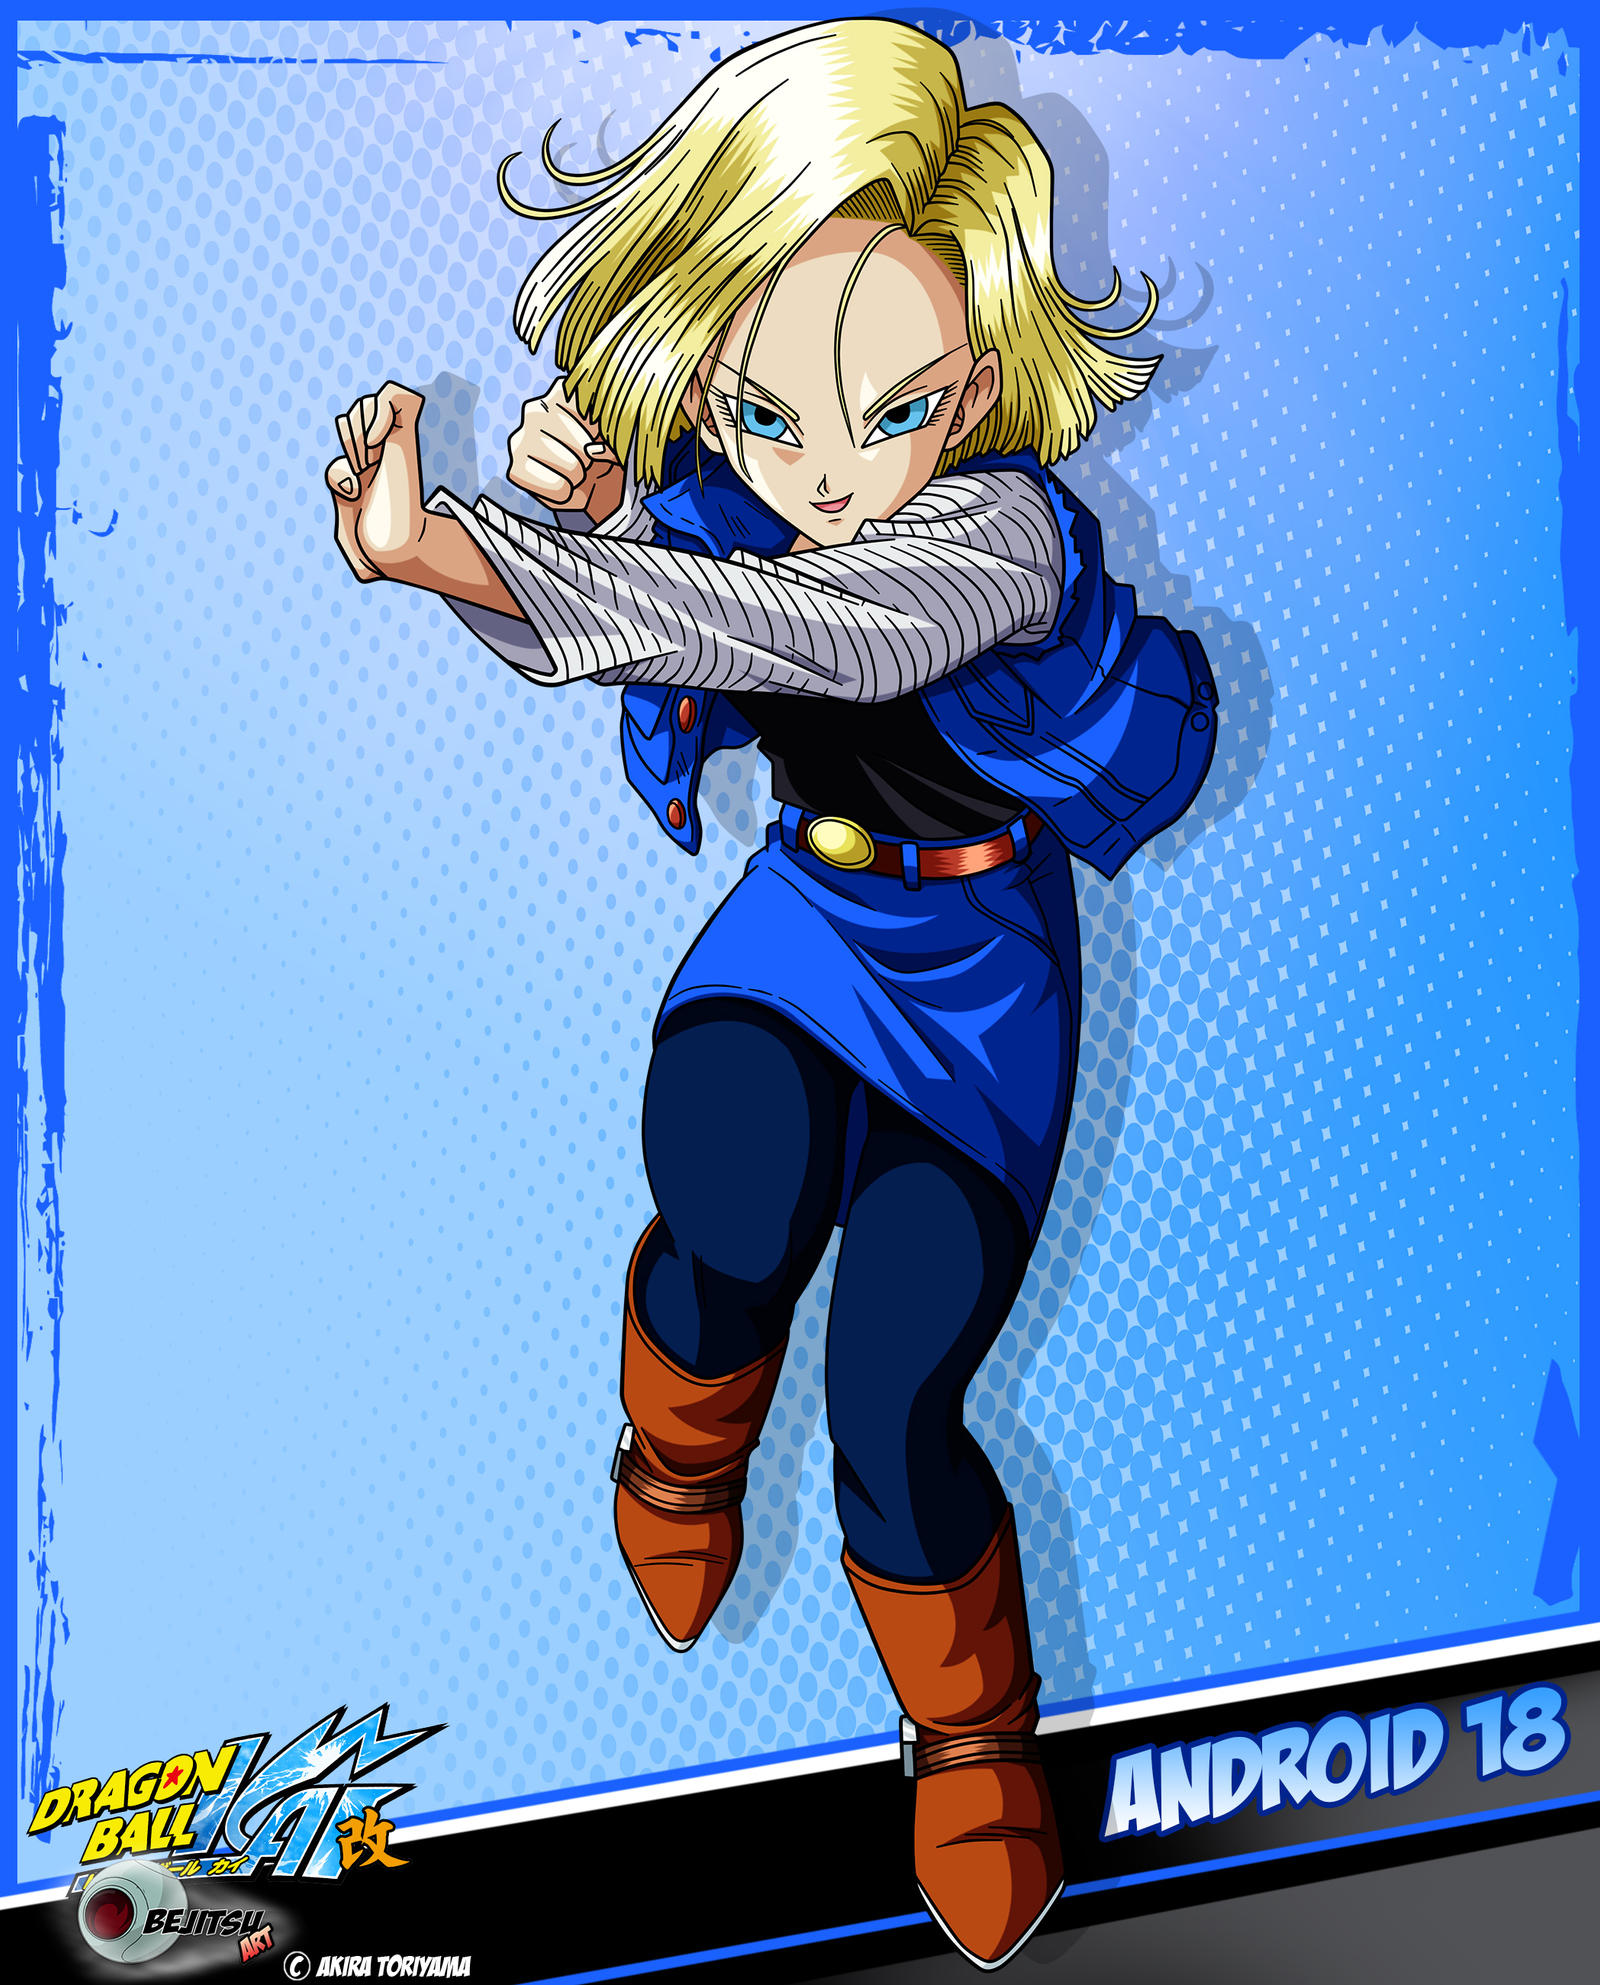 Dragon Ball Z - Android 18 by DBCProject on DeviantArt